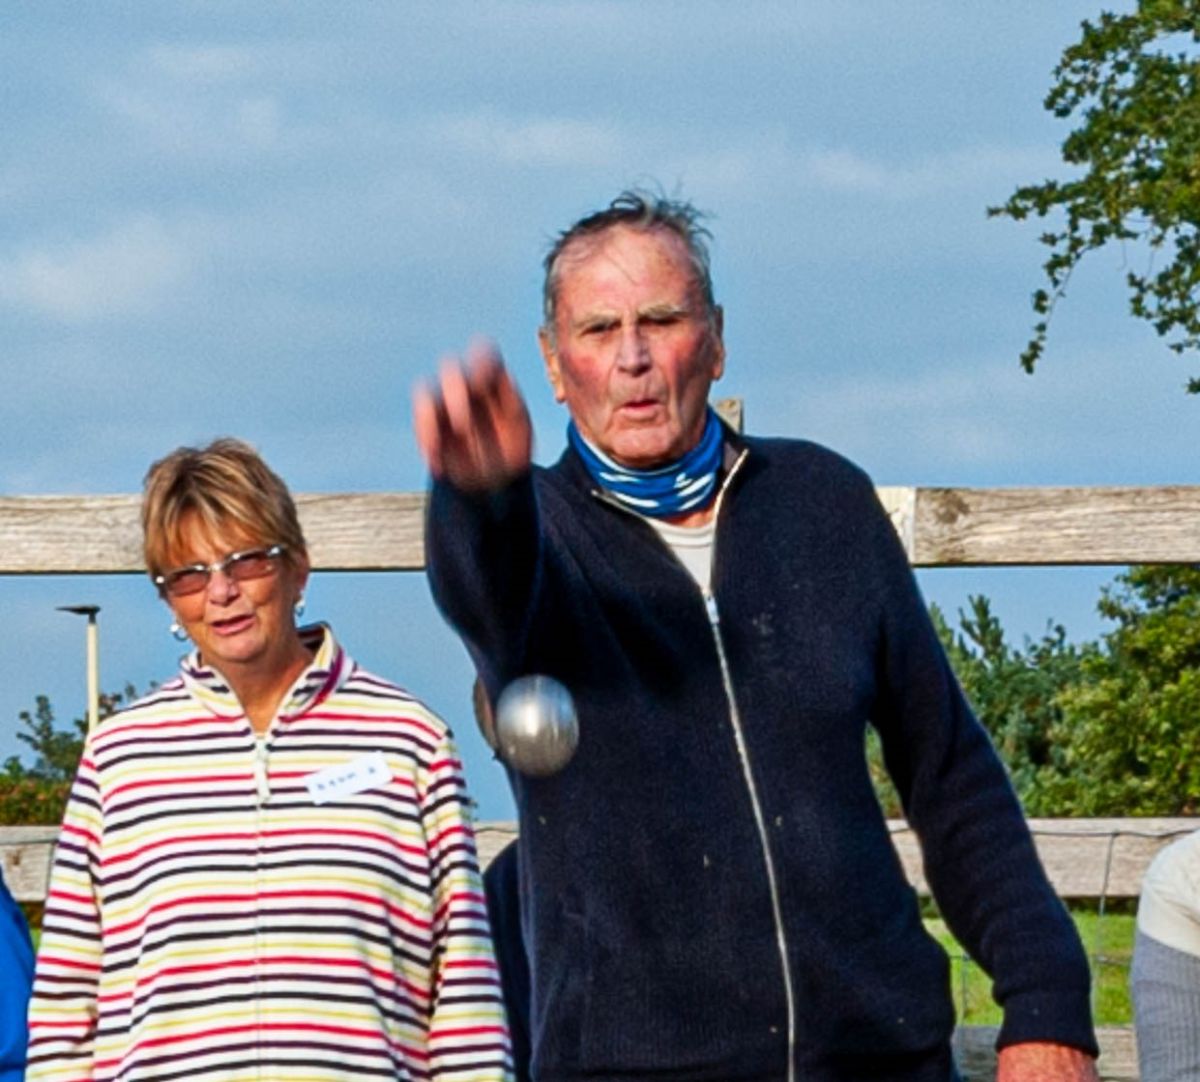 Bay Sports, Petanque - Mandy and Monty